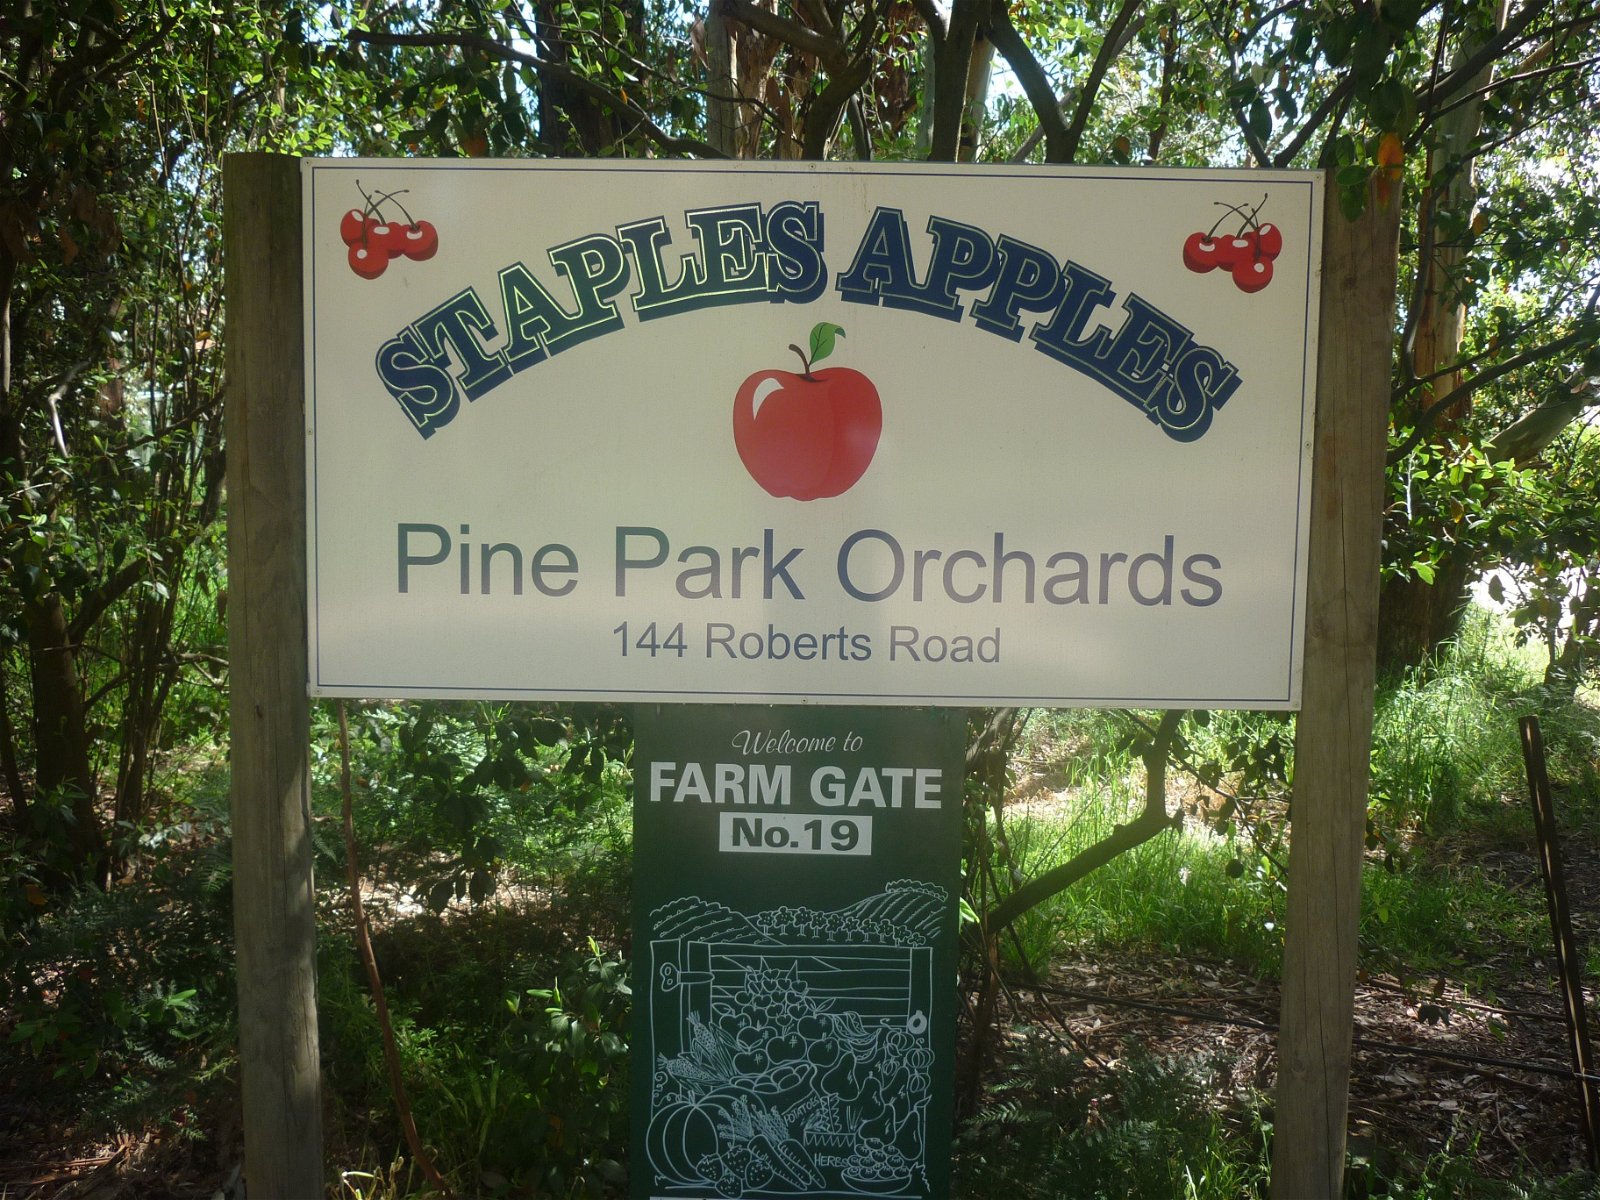 Staples Apples - Accommodation Find 2